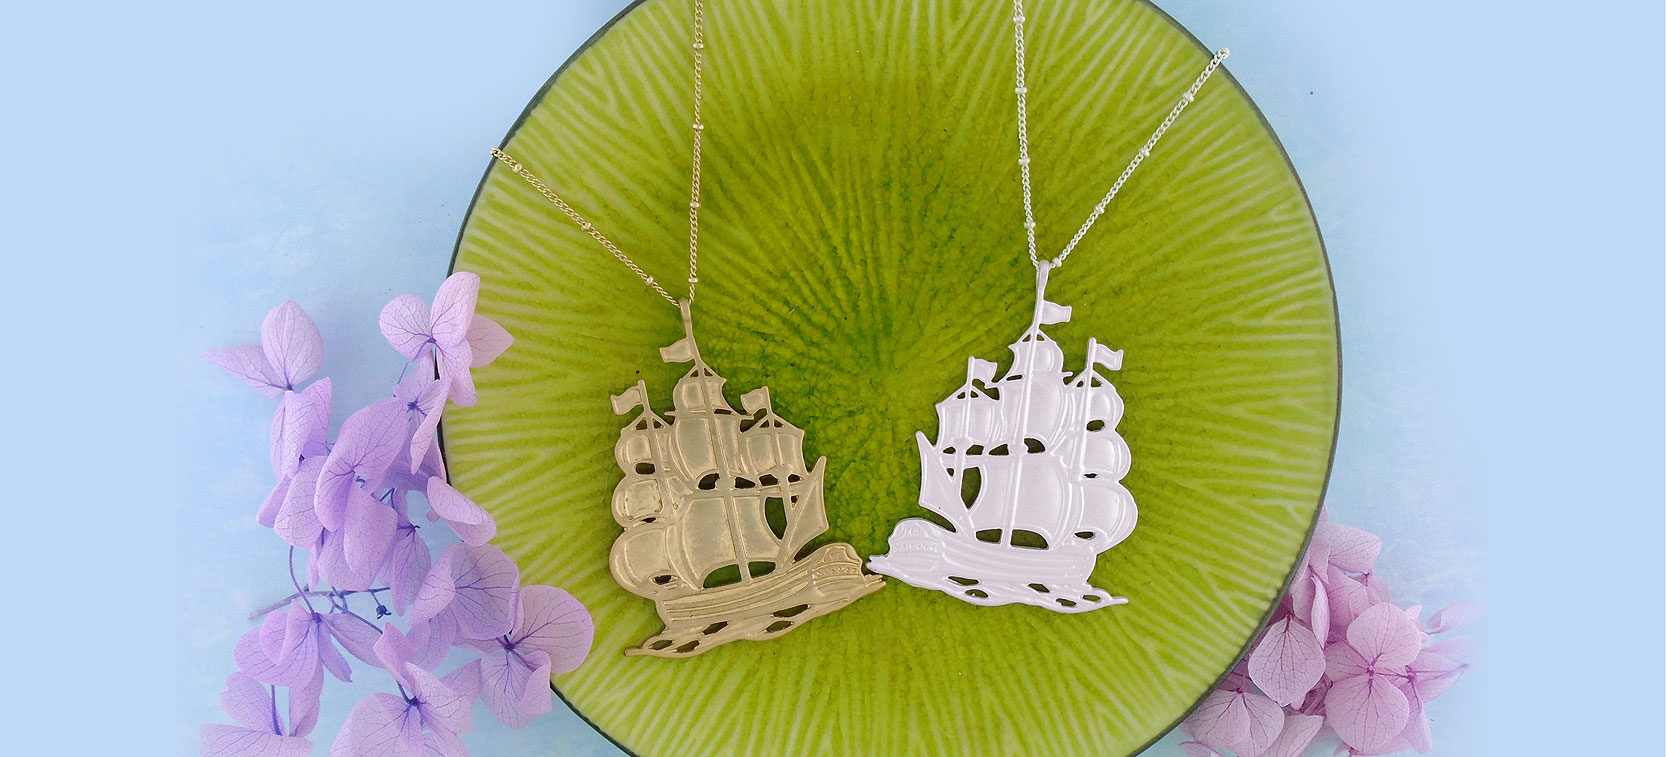 LAVISHY design and wholesale Boat themed vegan accessories and gfits to gift shops, boutiques and book stores in Canada, USA and worldwide.